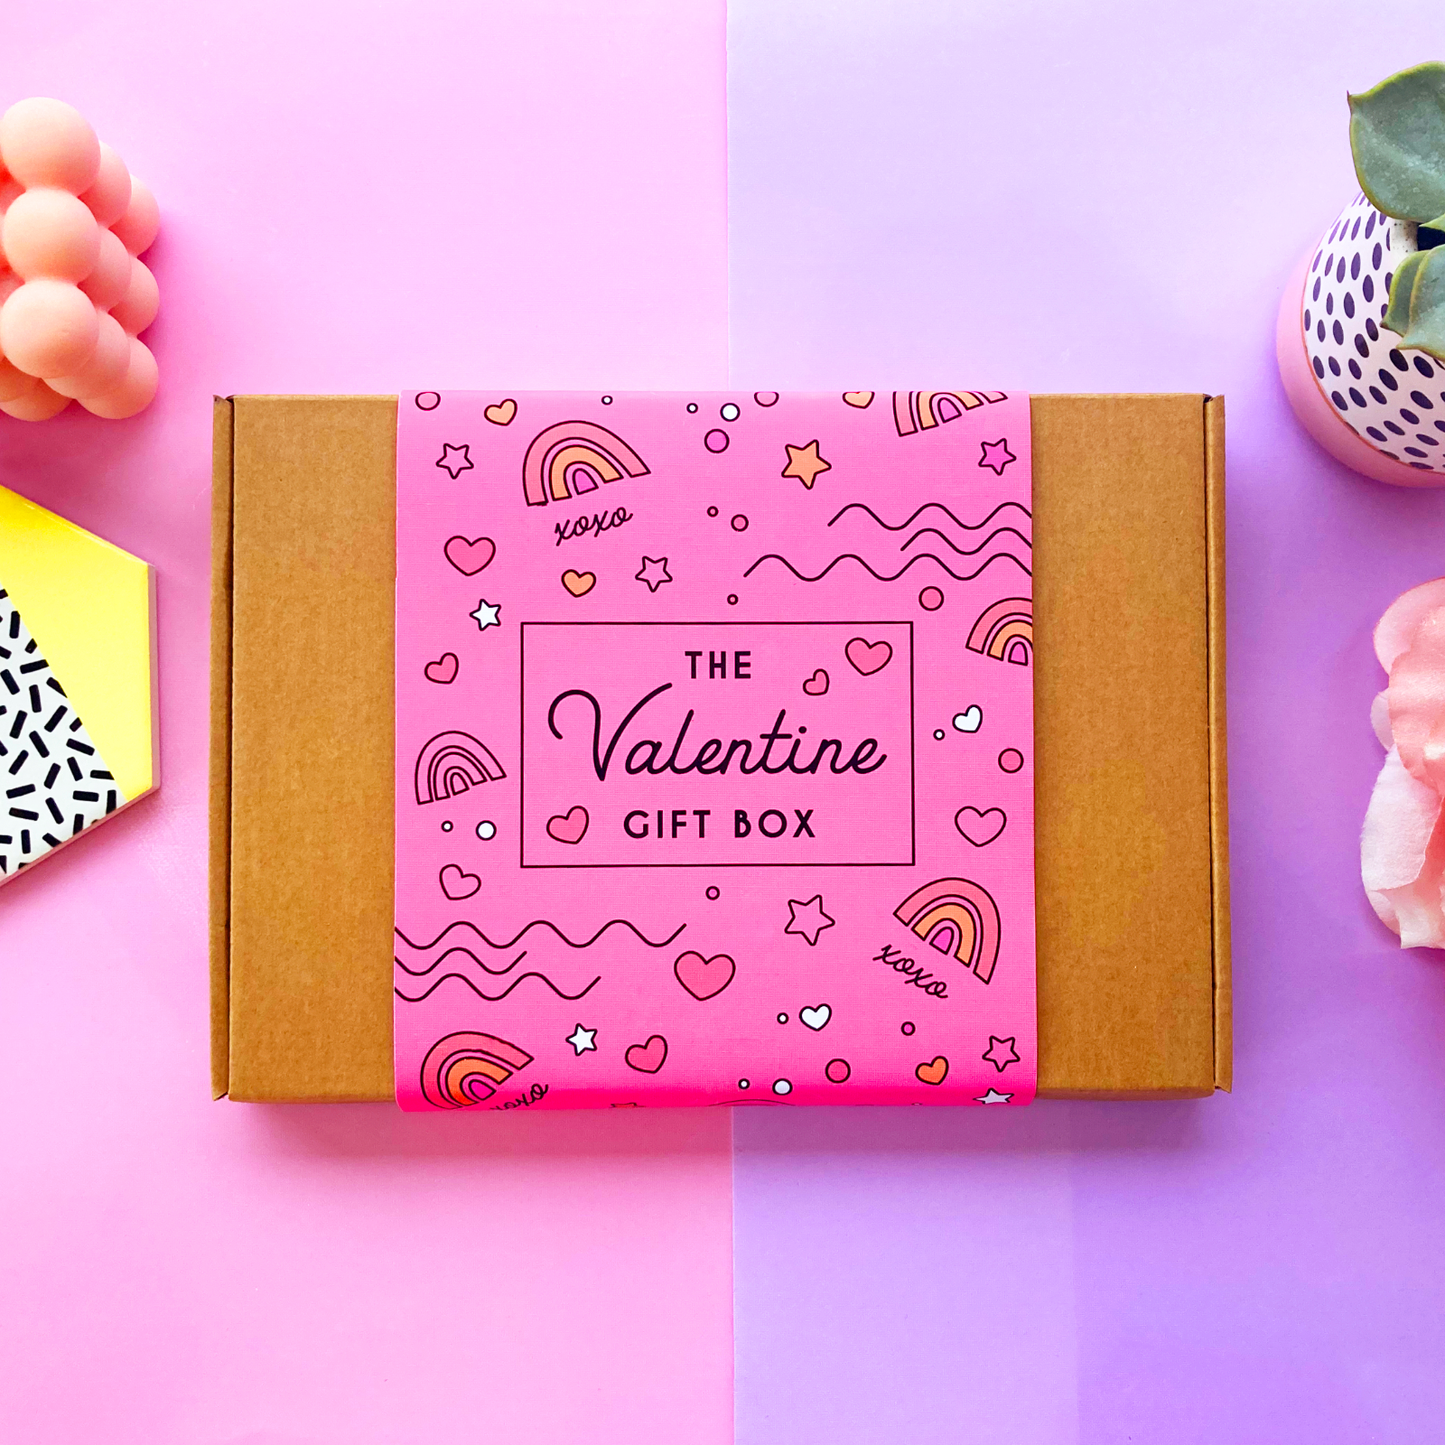 Reasons I Love You Personalised Valentine's Box